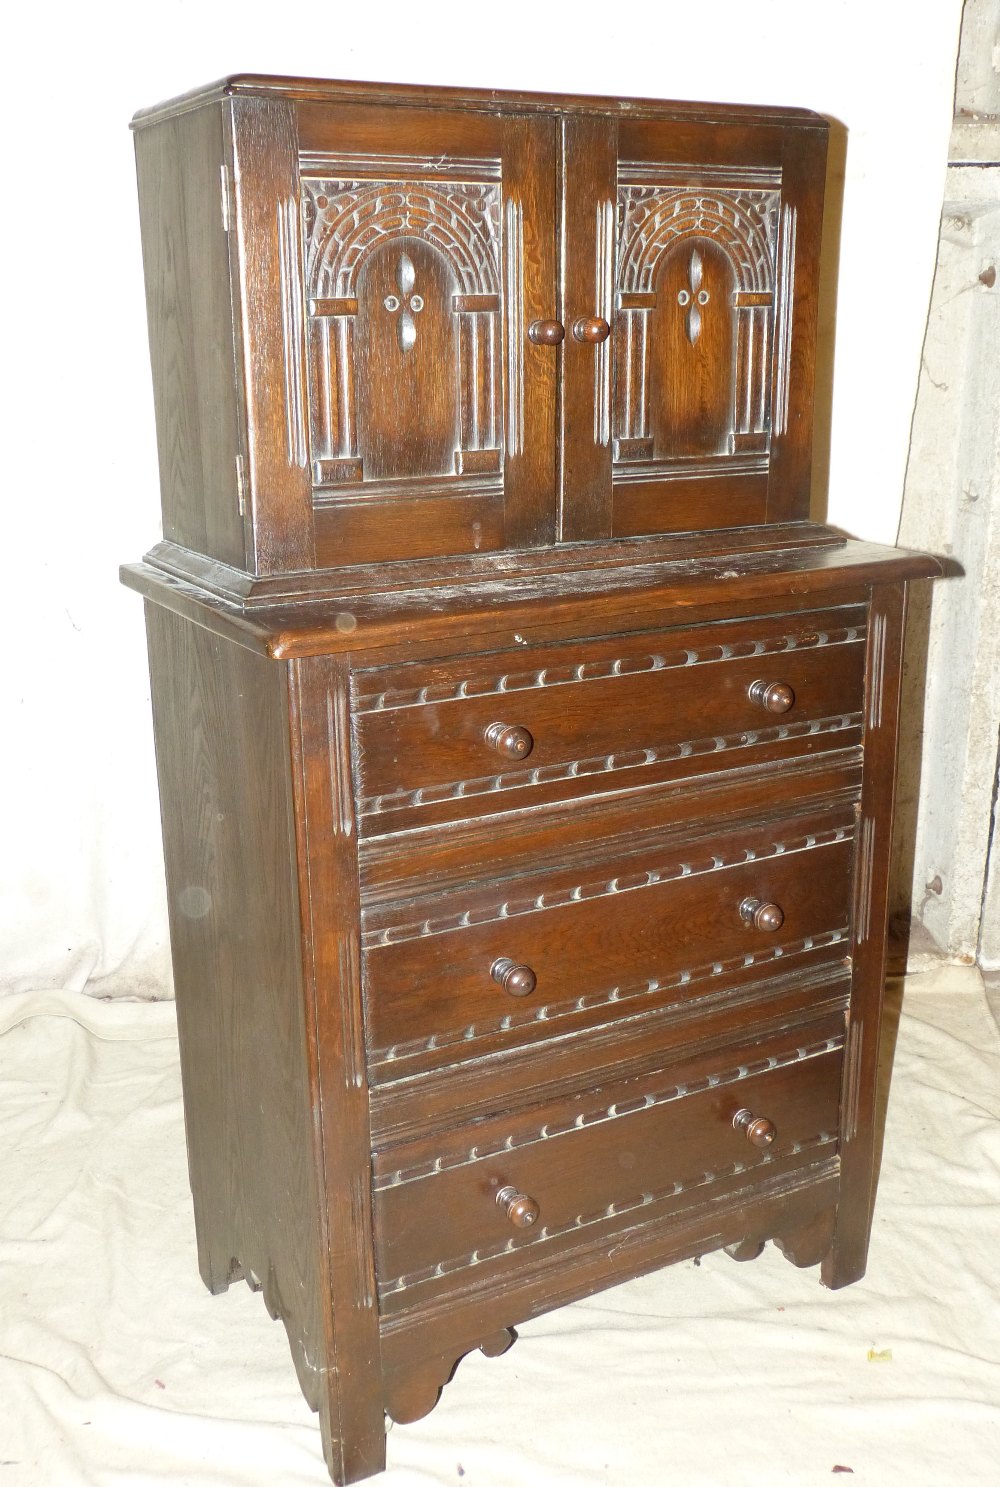 A Similar Oak Chest having 2 panelled doors with carved arched motifs above 3 long drawers with